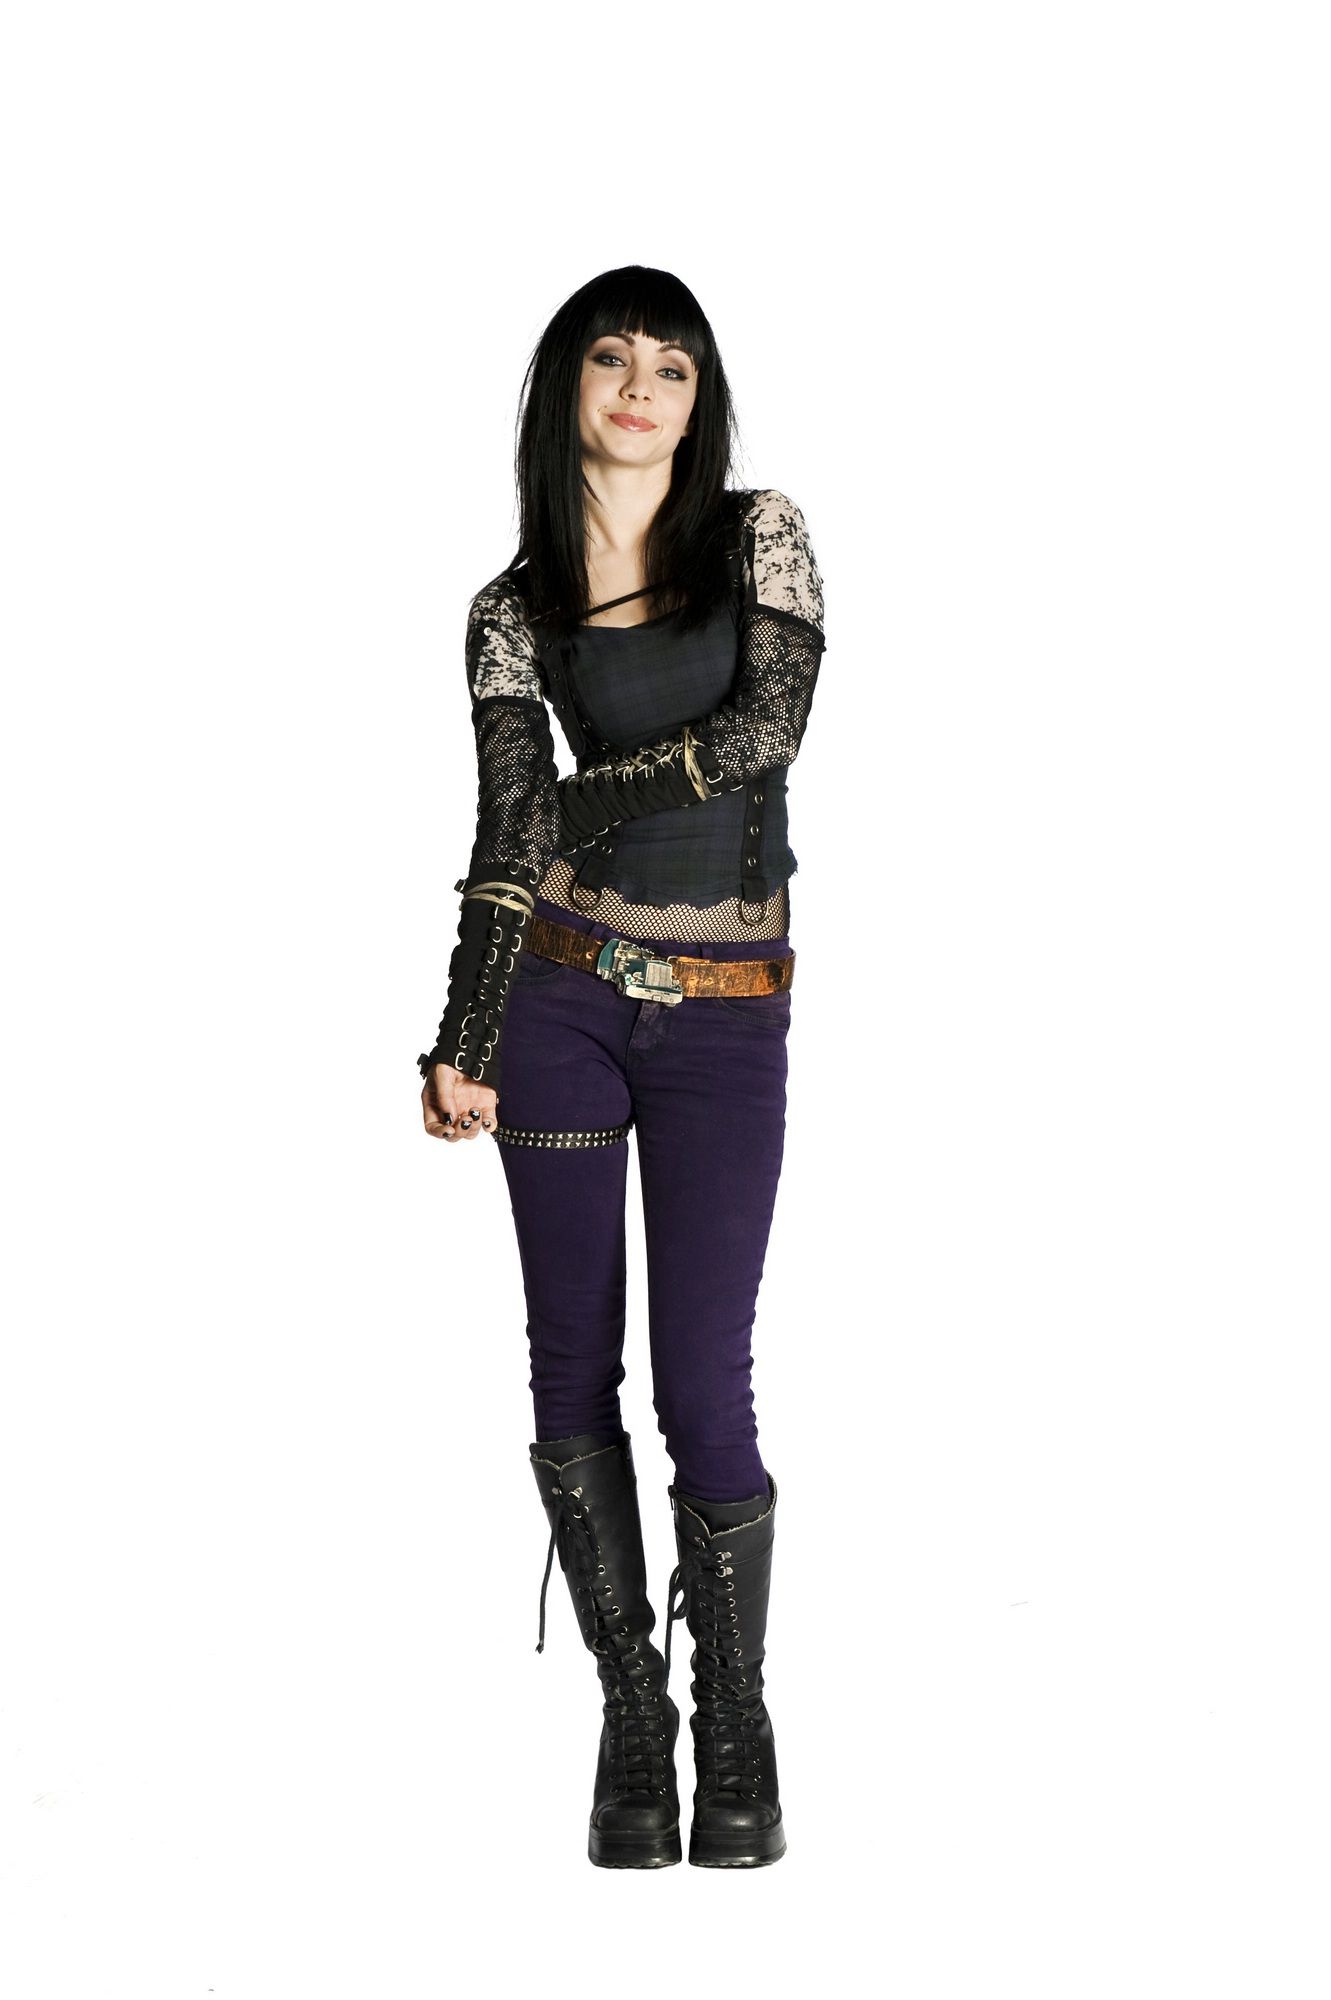 alana koch recommends Kenzi Lost Girl Clothes